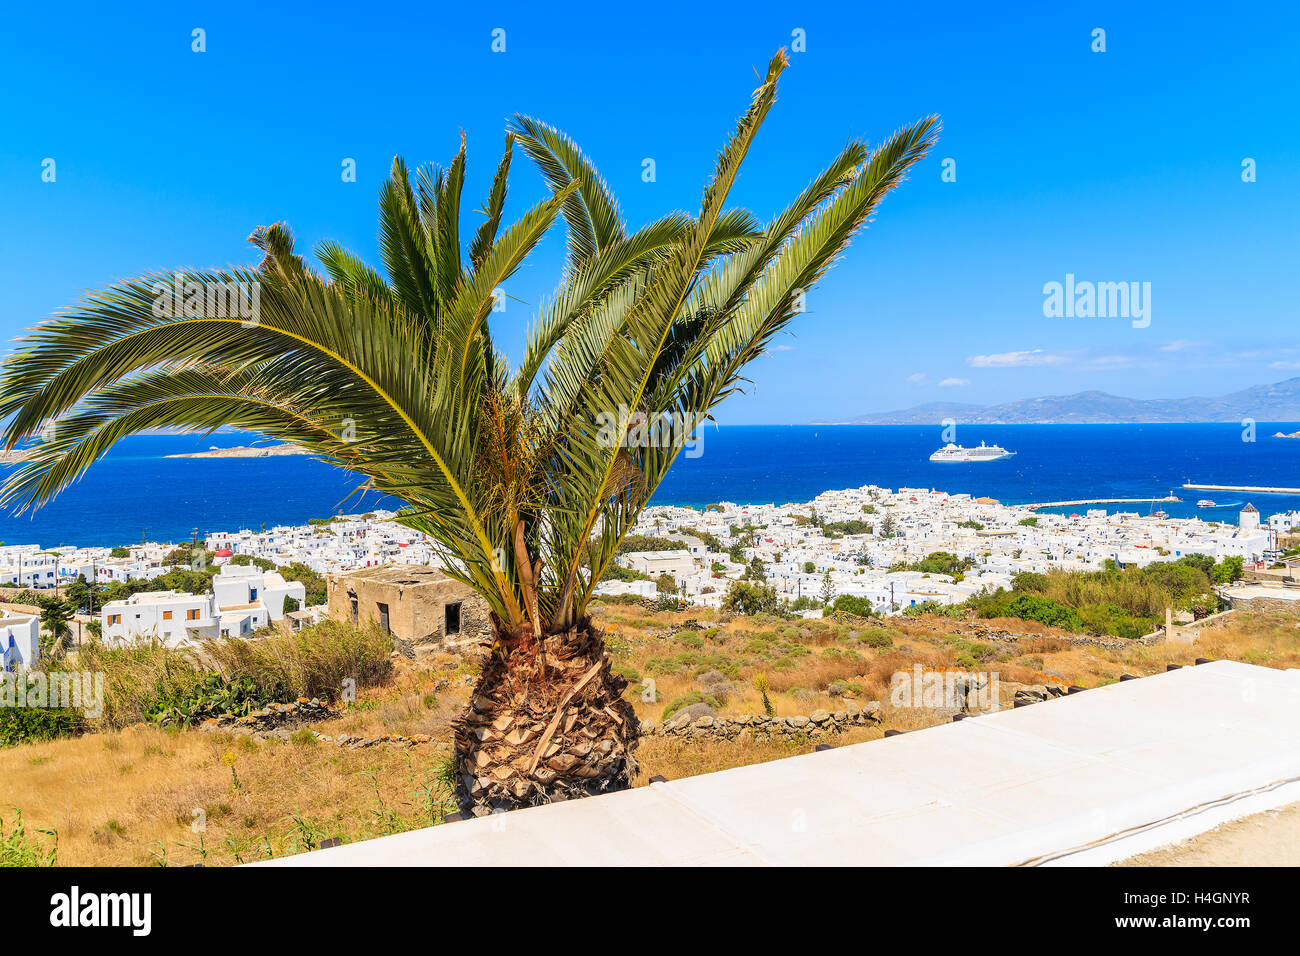 View of Mykonos port with palm tree in foreground, Mykonos island, Greece Stock Photo